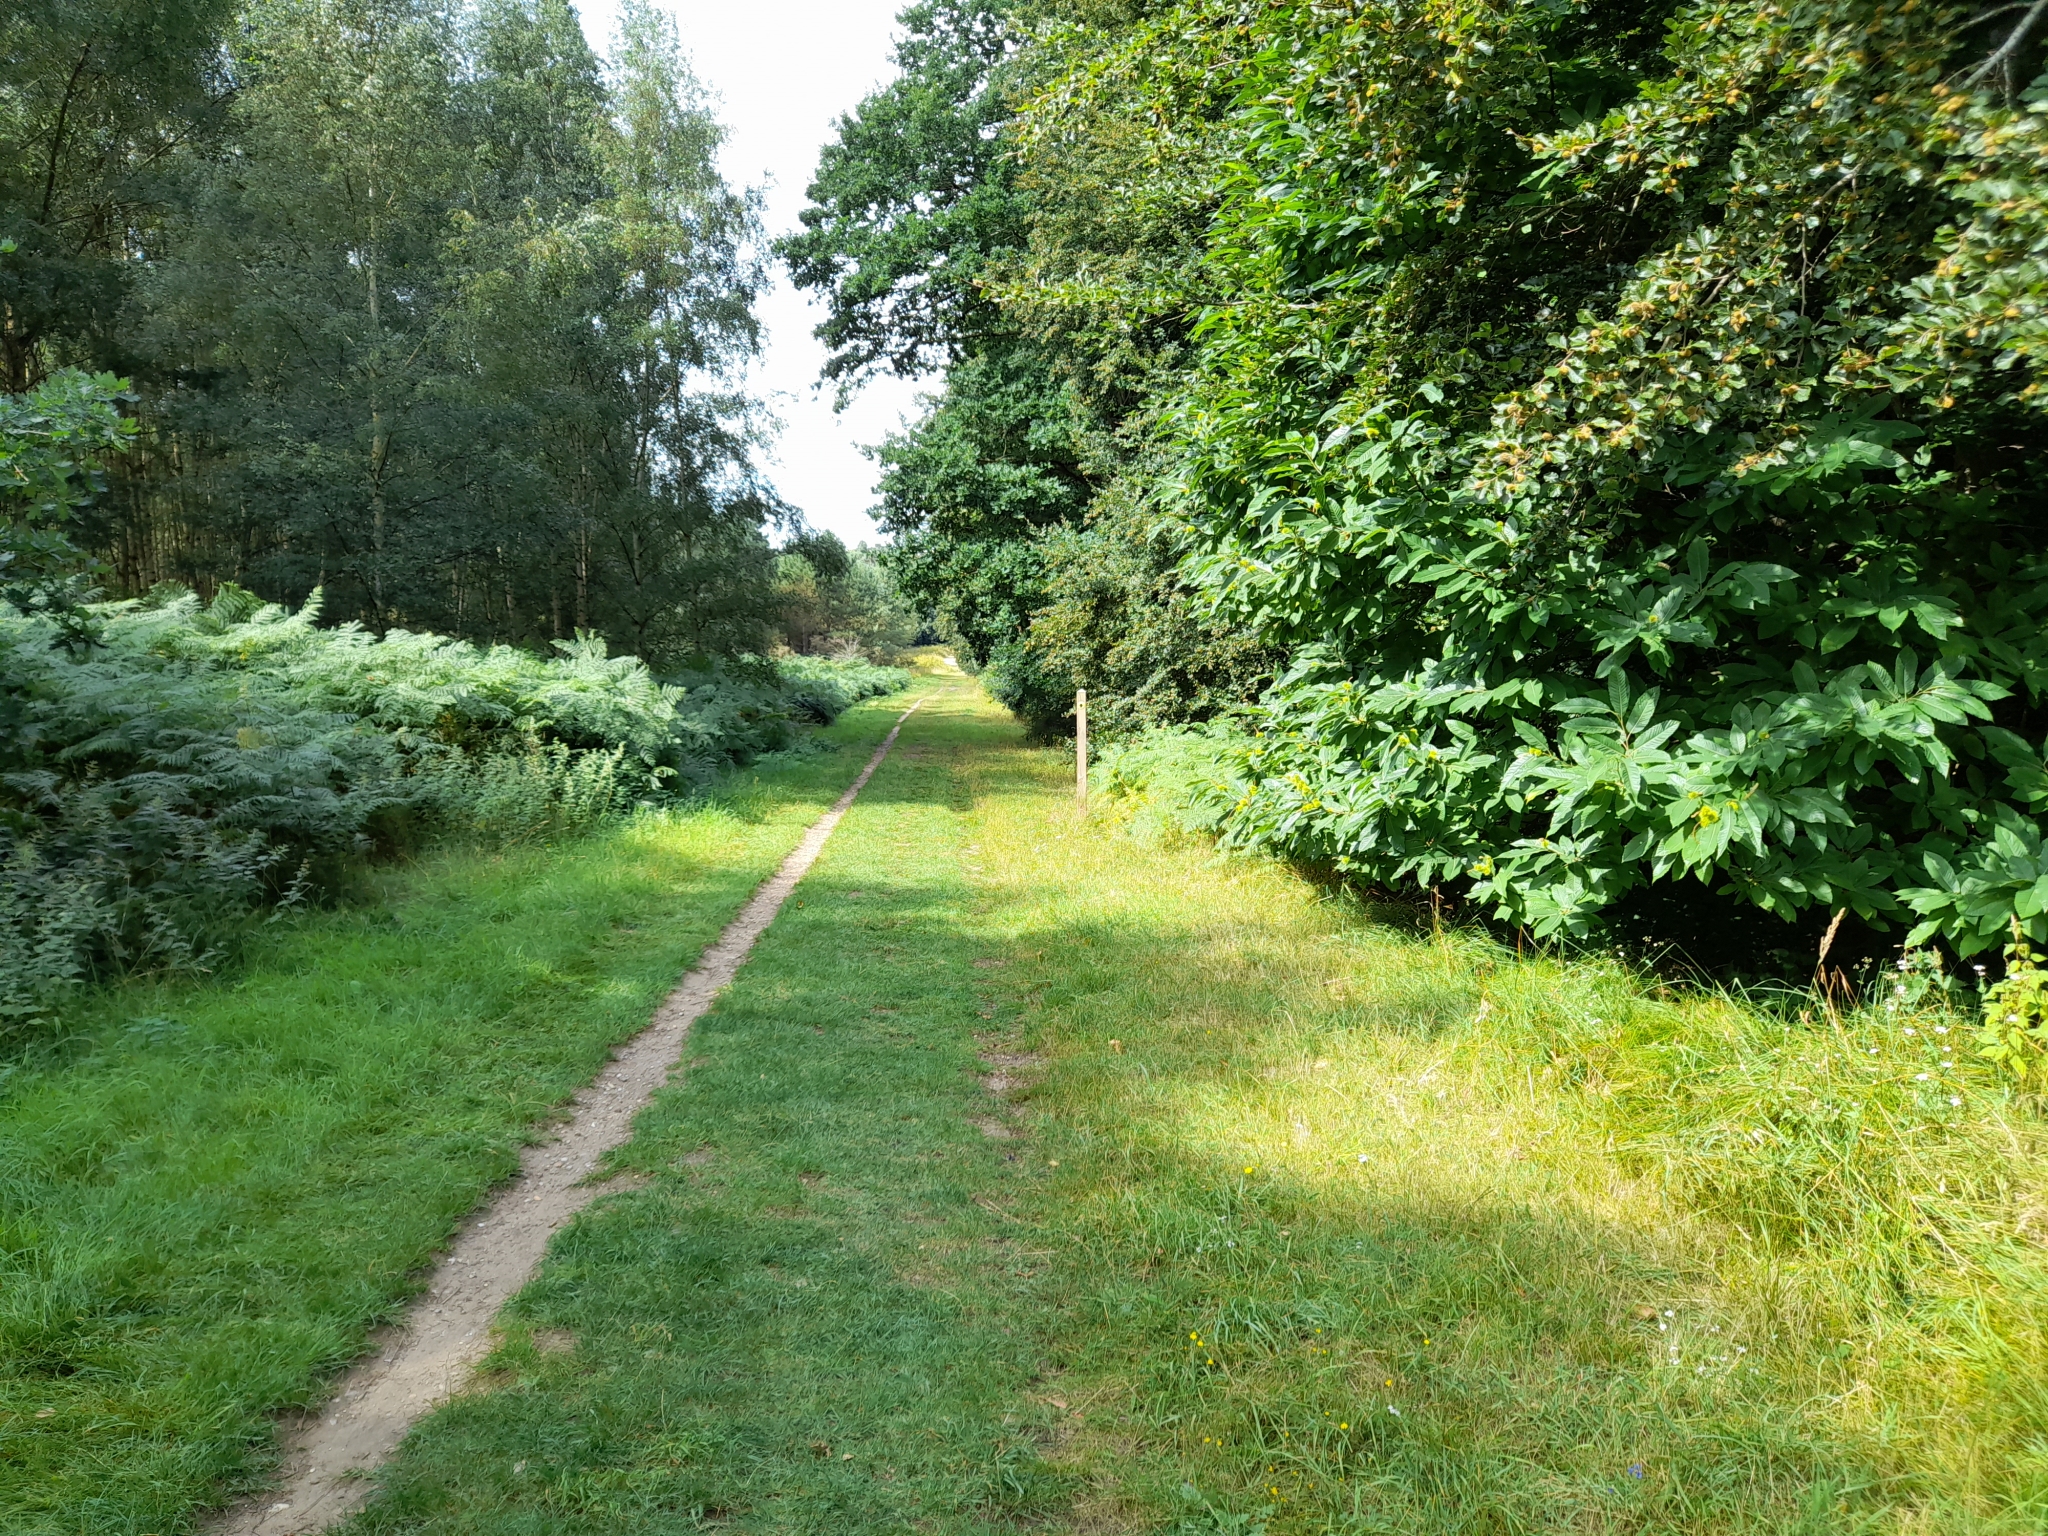 A photo from the FoTF Conservation Event - August 2021 - Maintenance tasks at Mildenhall Mugwort Pit & Mildenhall Warren Lodge : A shot of one of the footpaths on site